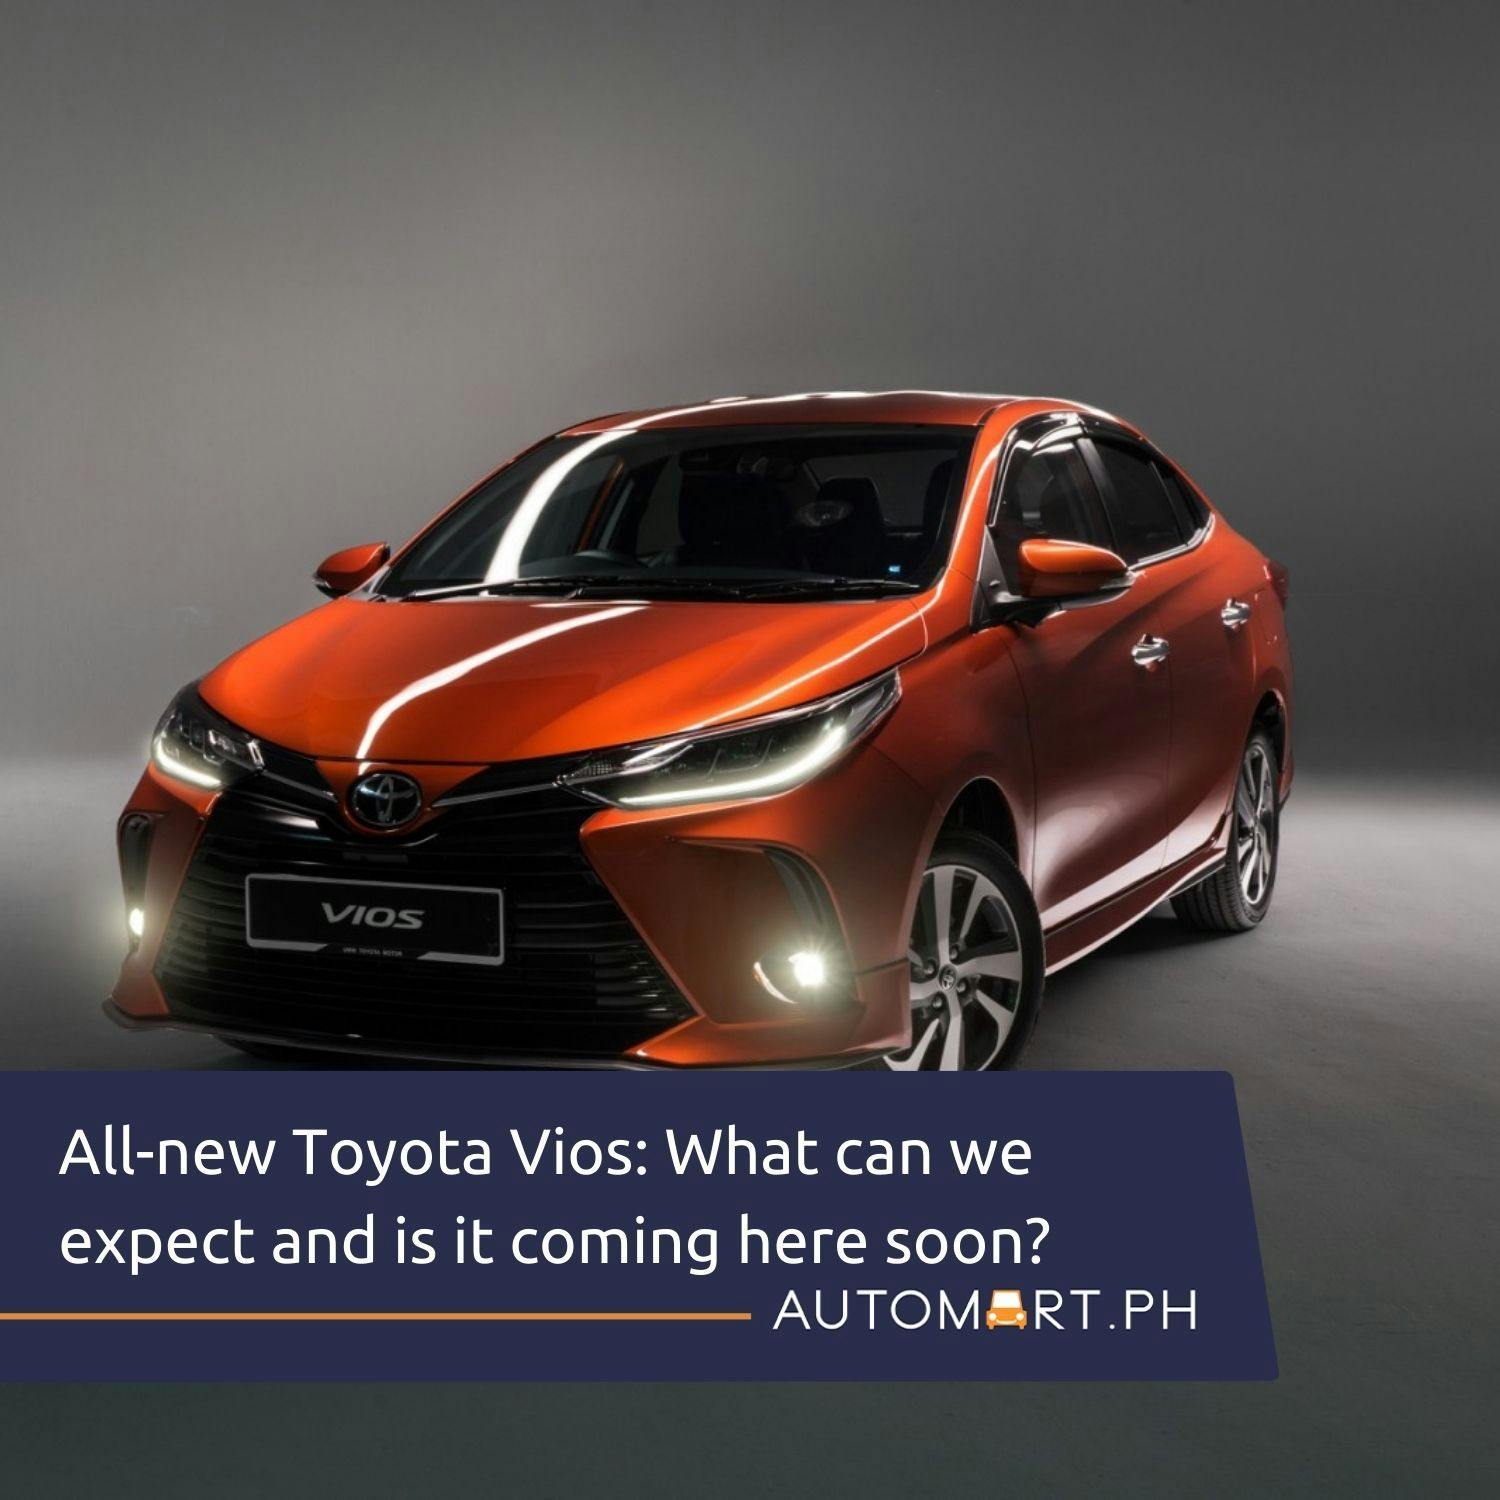 All-new Toyota Vios: What can we expect and is it coming here soon?